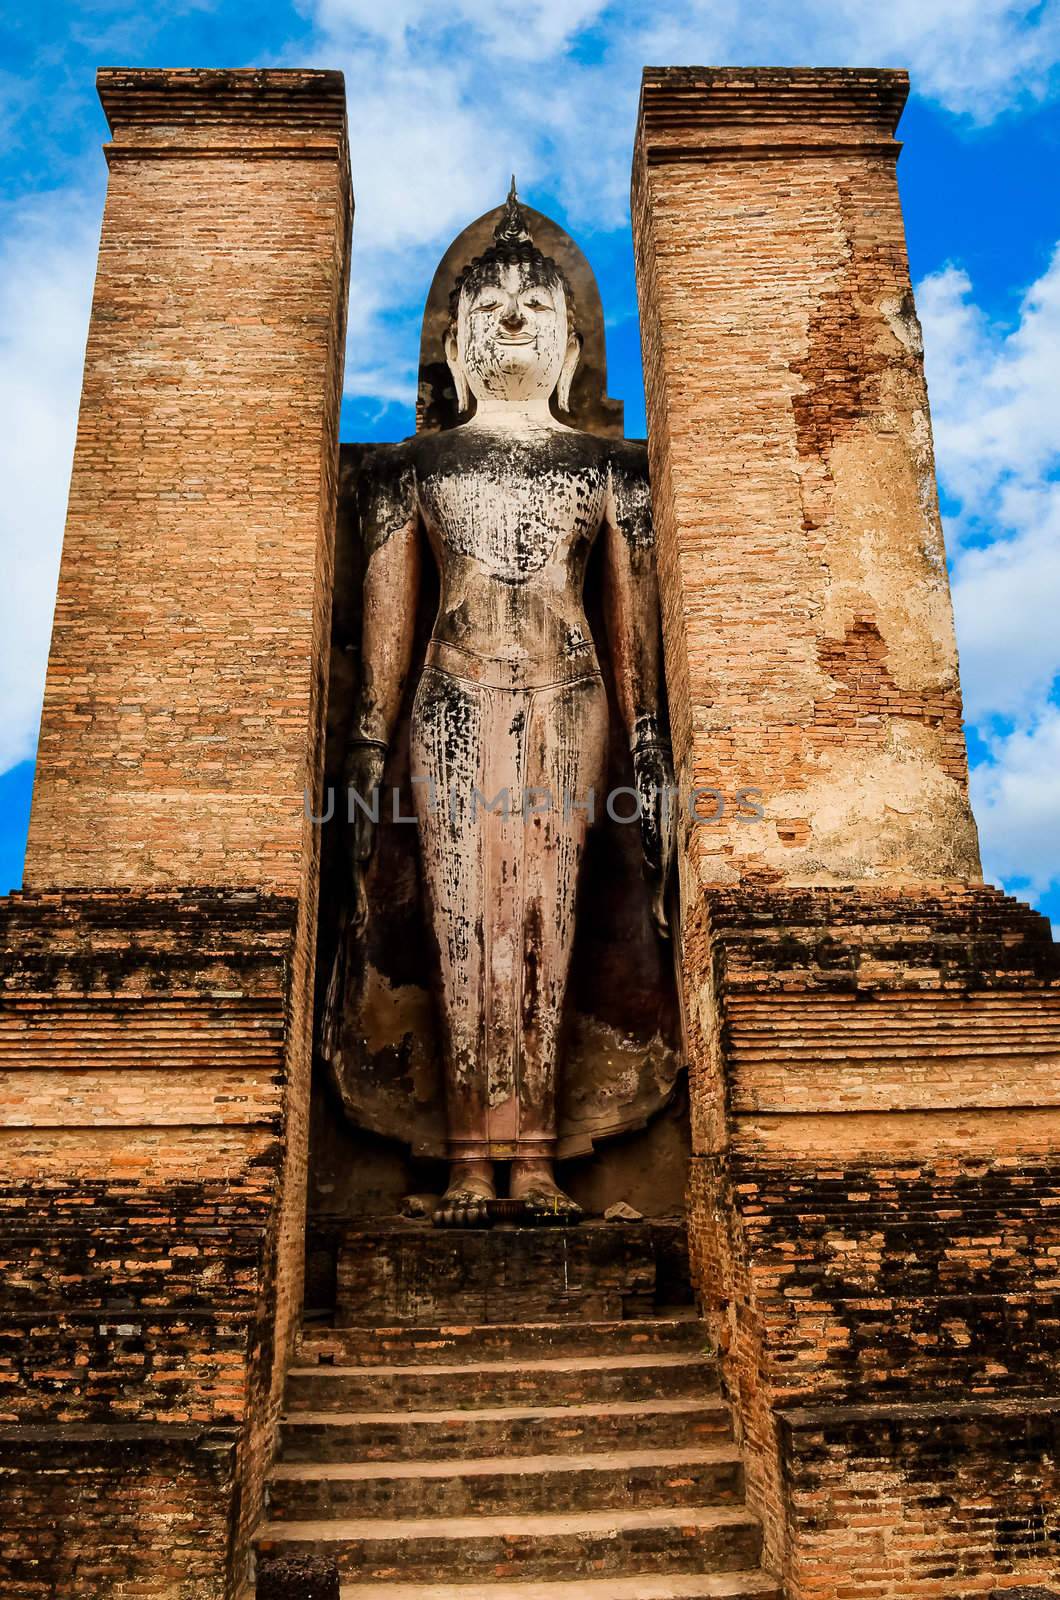 Statue of standing Buddha in Sukhothai historical park, Thailand by martinm303